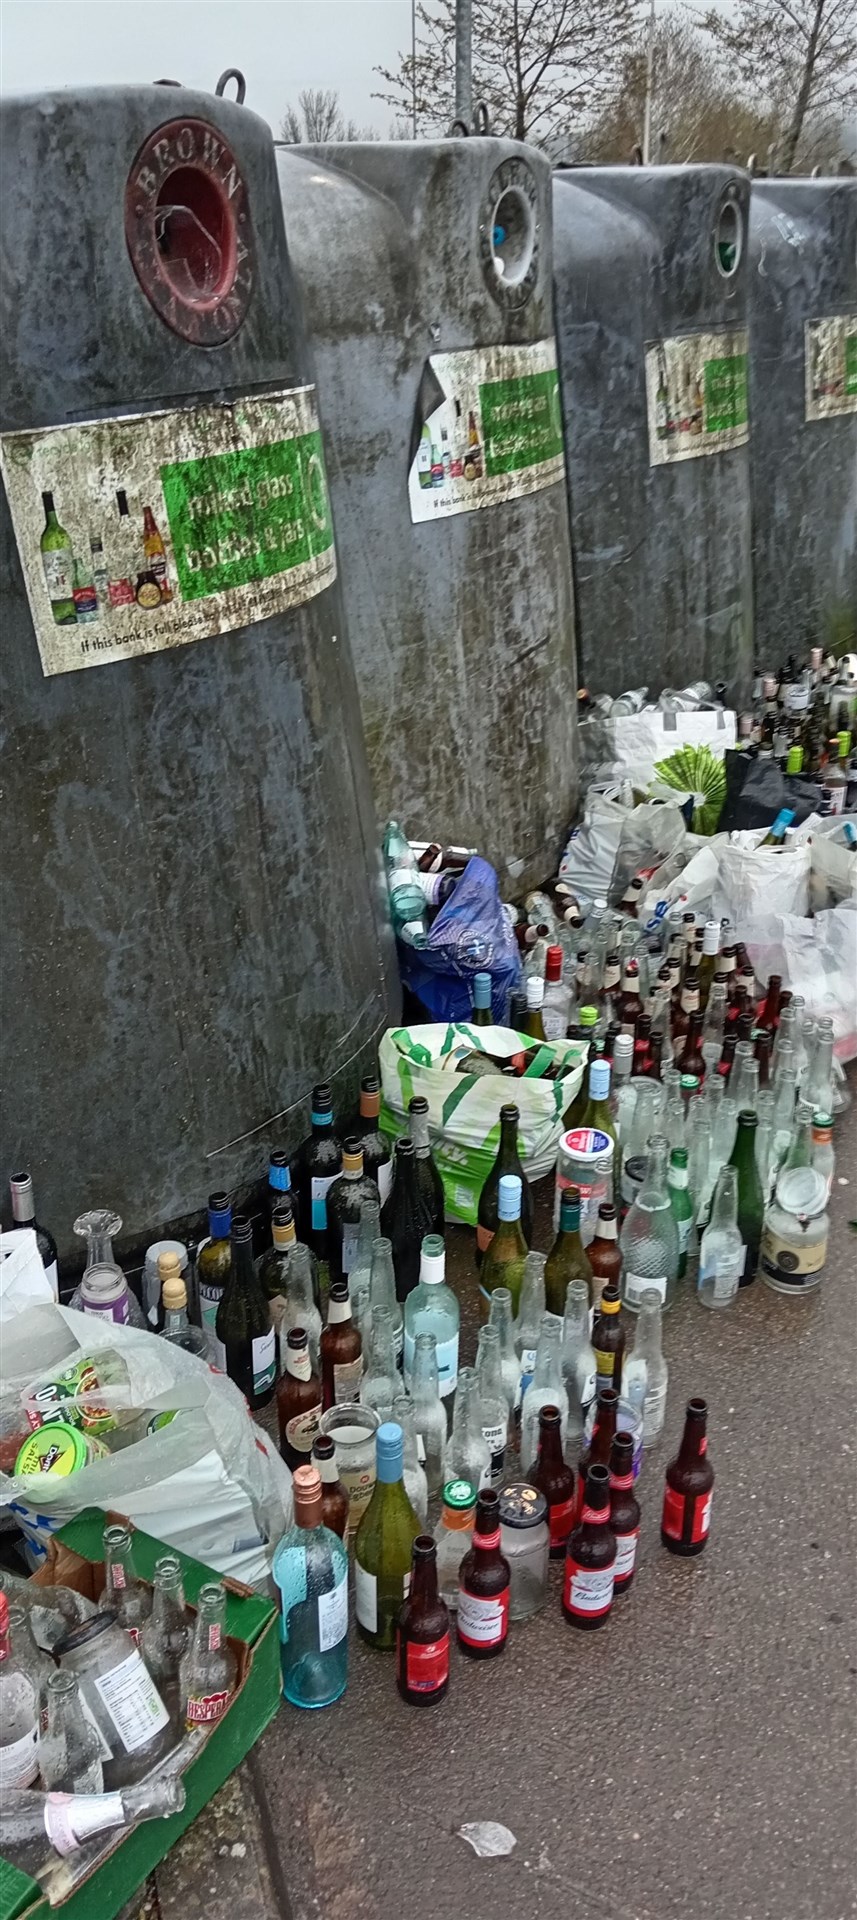 Piles of glass bottles were spotted next to the full bottle banks at the Dores Road Tesco supermarket on Sunday morning.